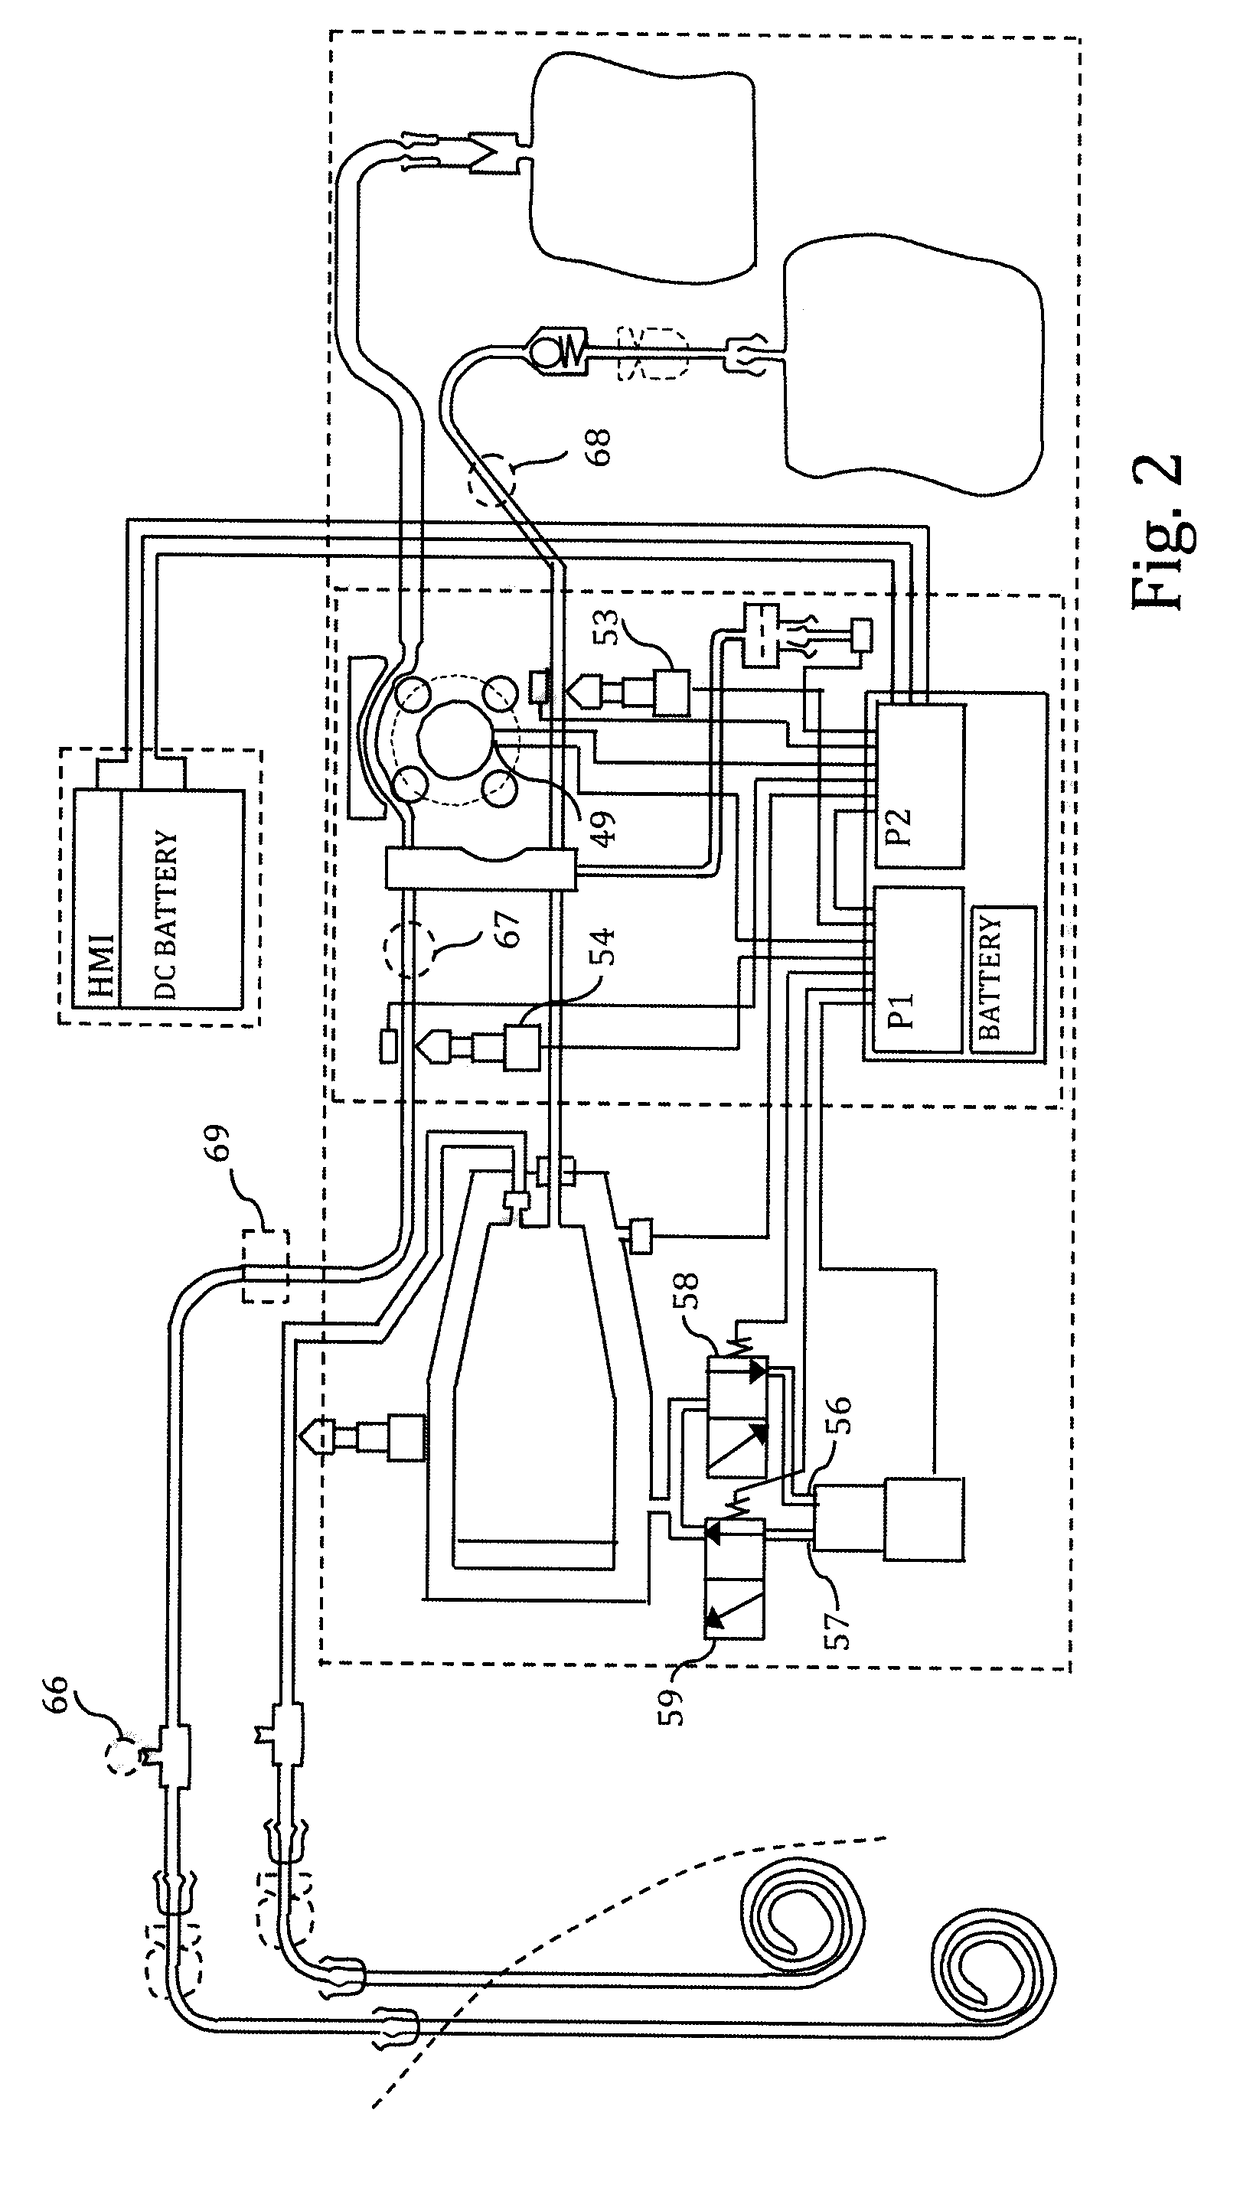 Apparatus for performing peritoneal ultrafiltration